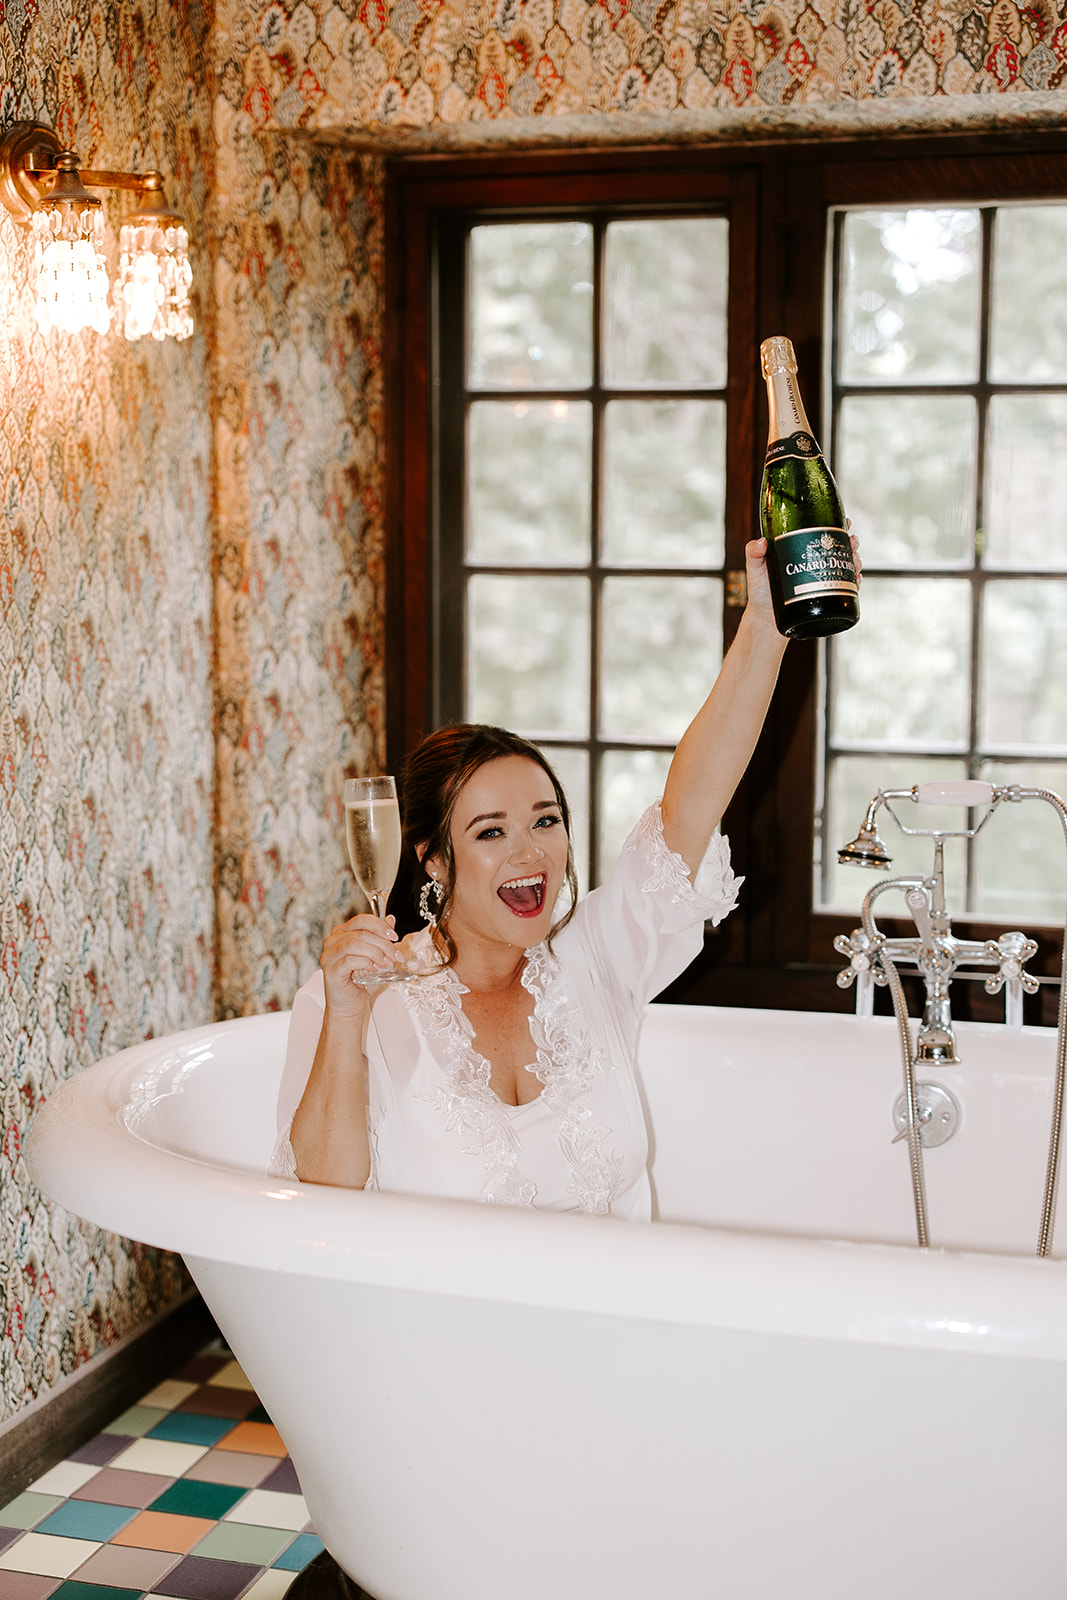 bride enjoys a glass of champagne in the bath tub as she prepares for her big day